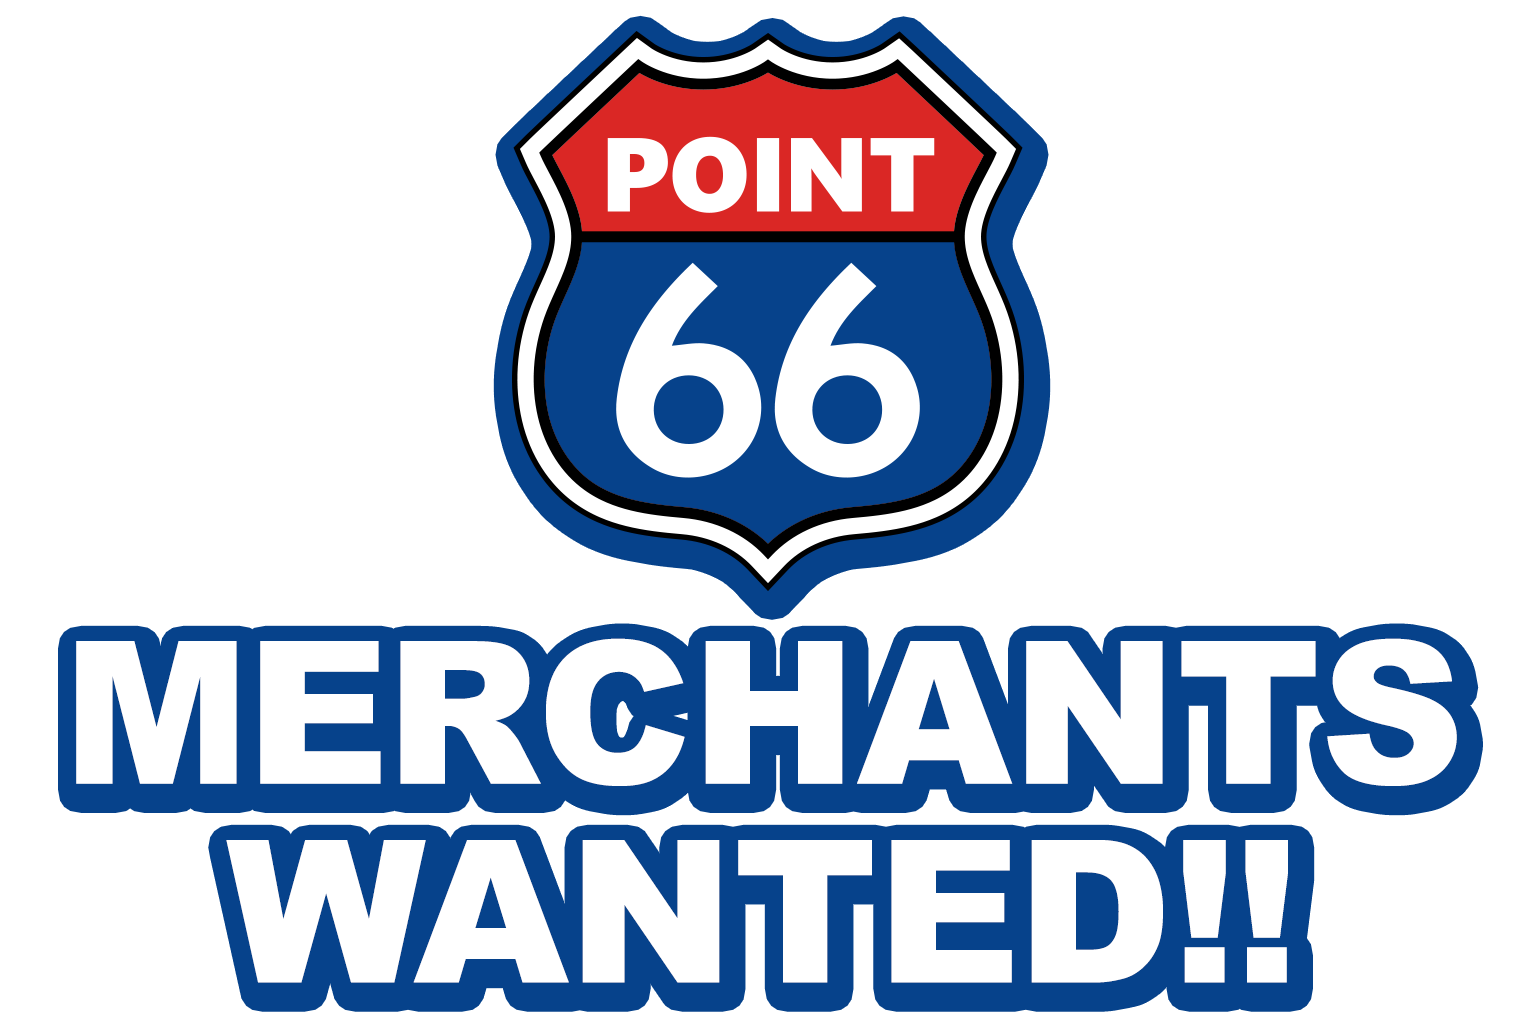 POINT66 | MERCHANTS WANTED!!